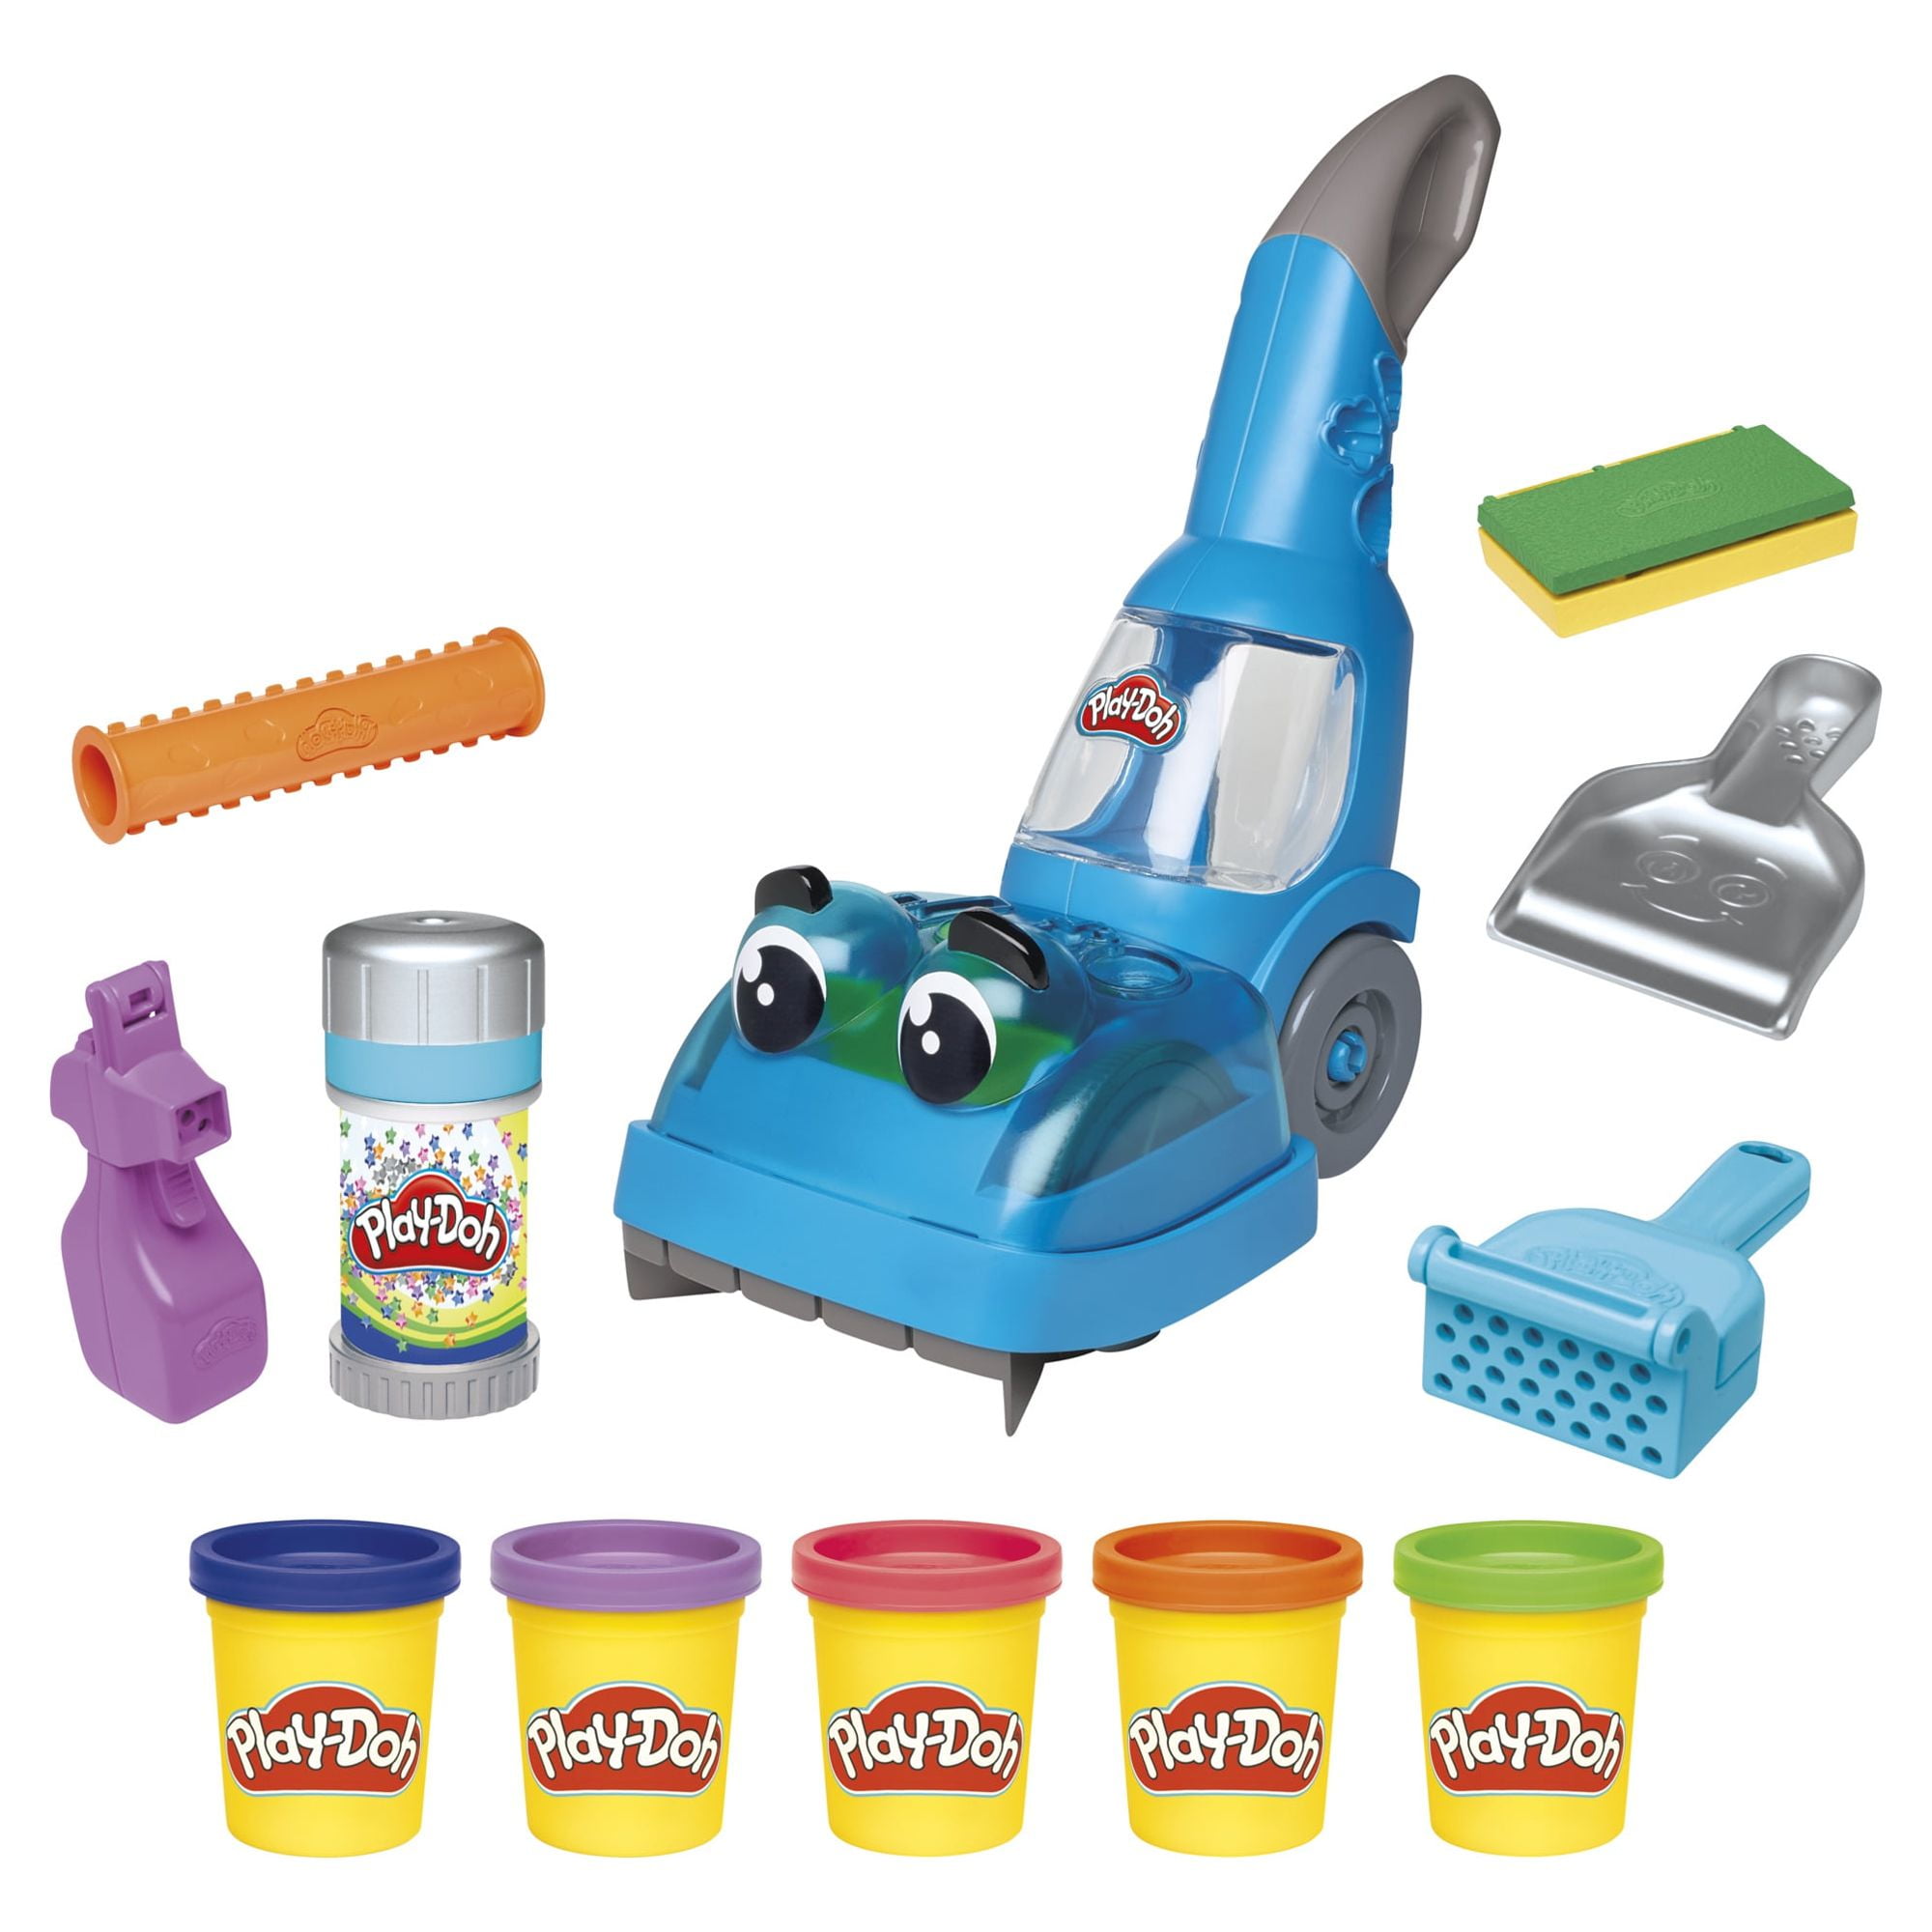 Play-Doh Zoom Zoom Vacuum and Cleanup Toy with 5 Colors, Hobbies